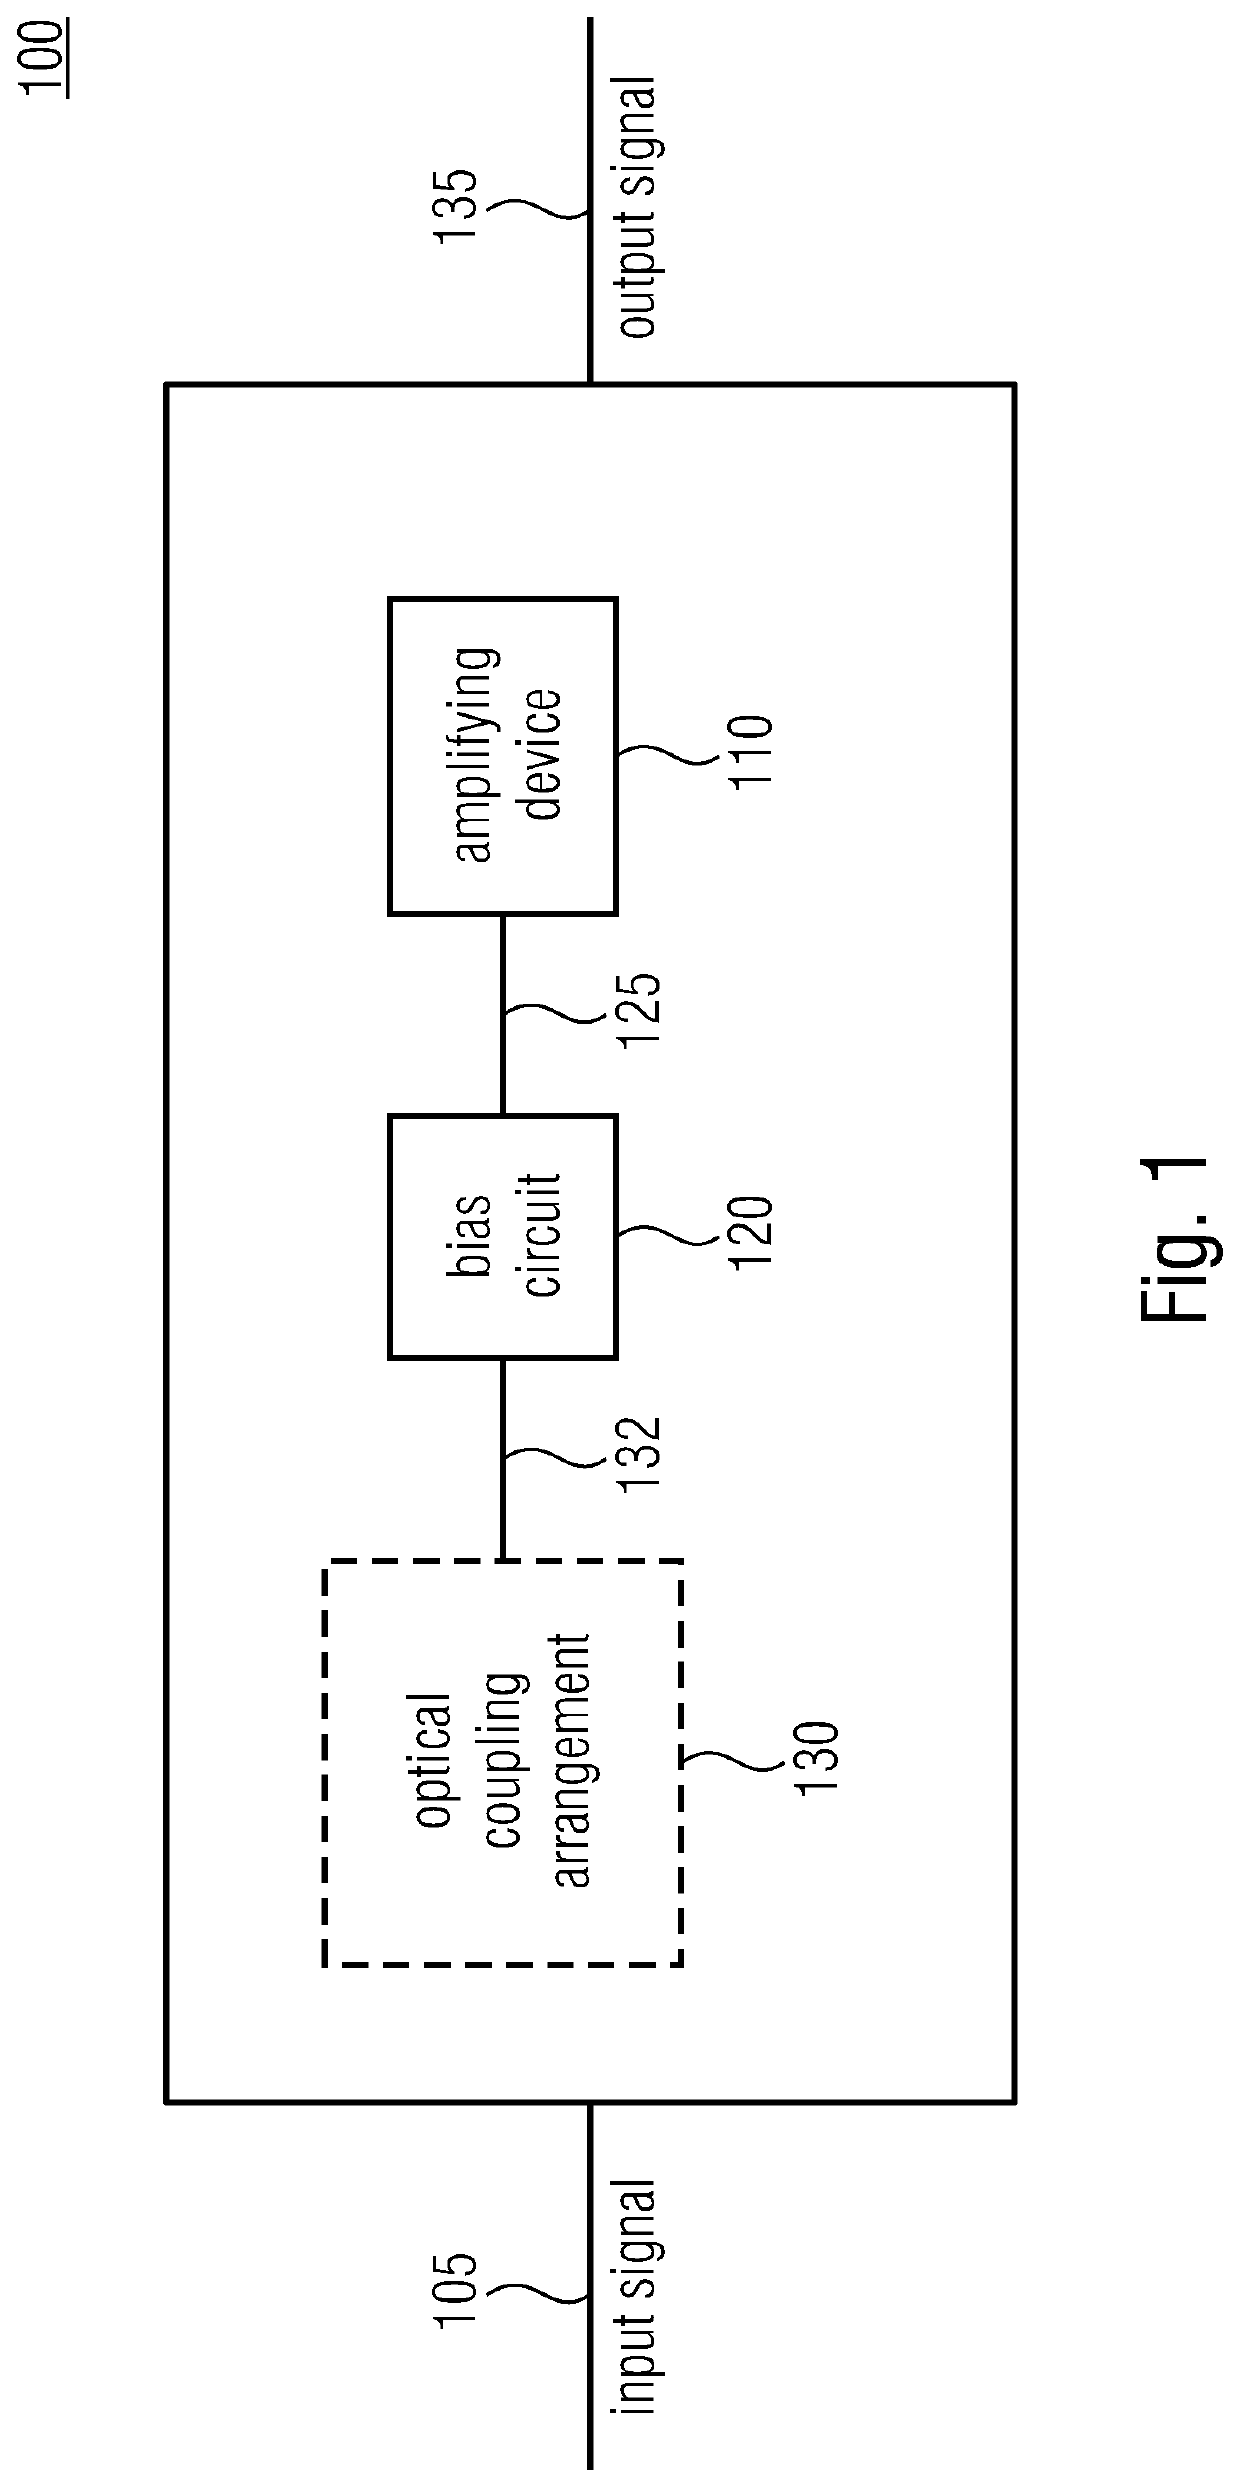 Amplifier, circuit for trimming a bias voltage, method for amplifying an input signal and method for trimming a bias voltage